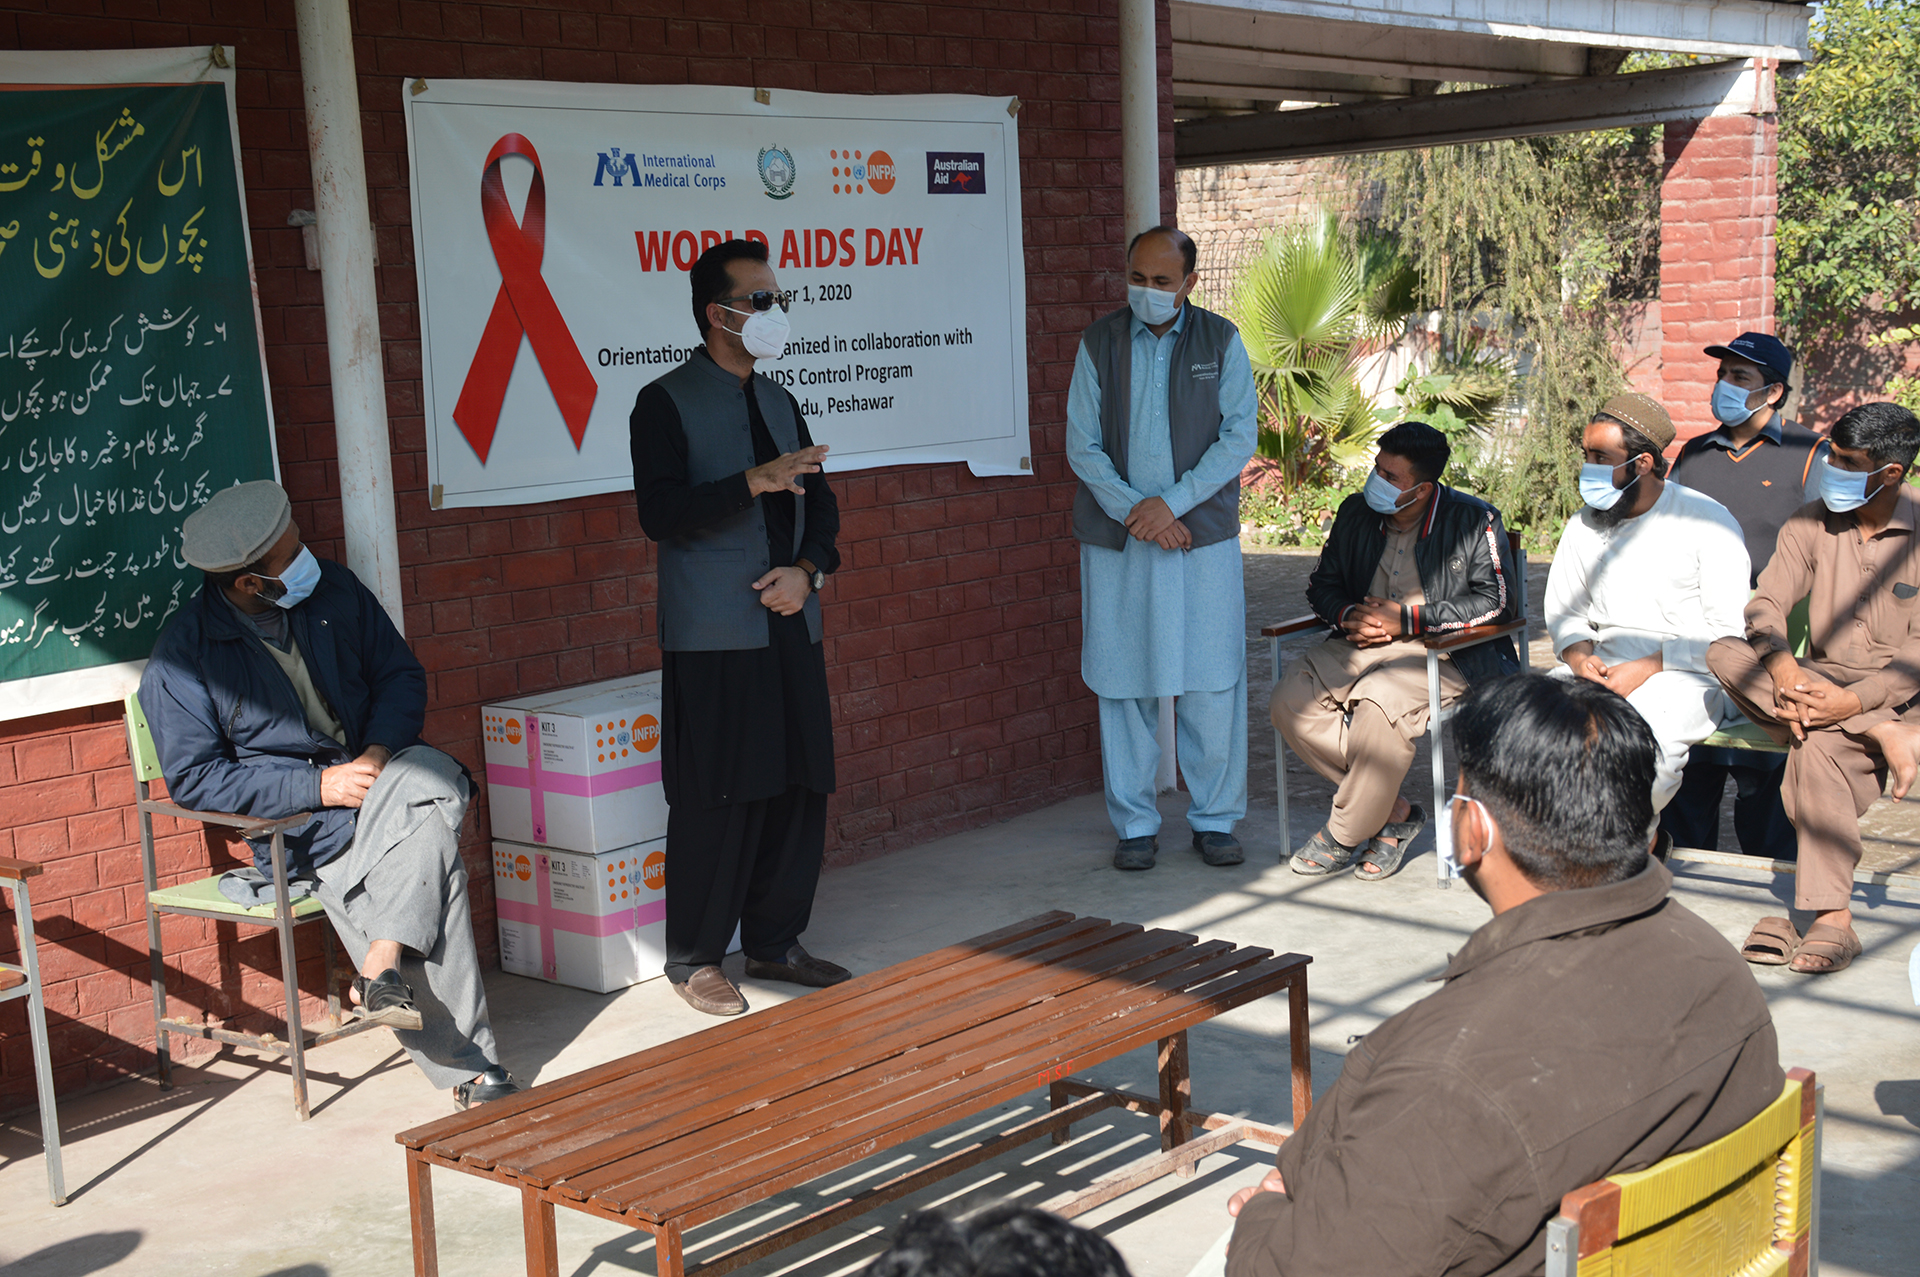 On December 1 to mark the World AIDS Day, the Pakistan team organized an orientation session at the Basic Health Unit, District Peshawar.